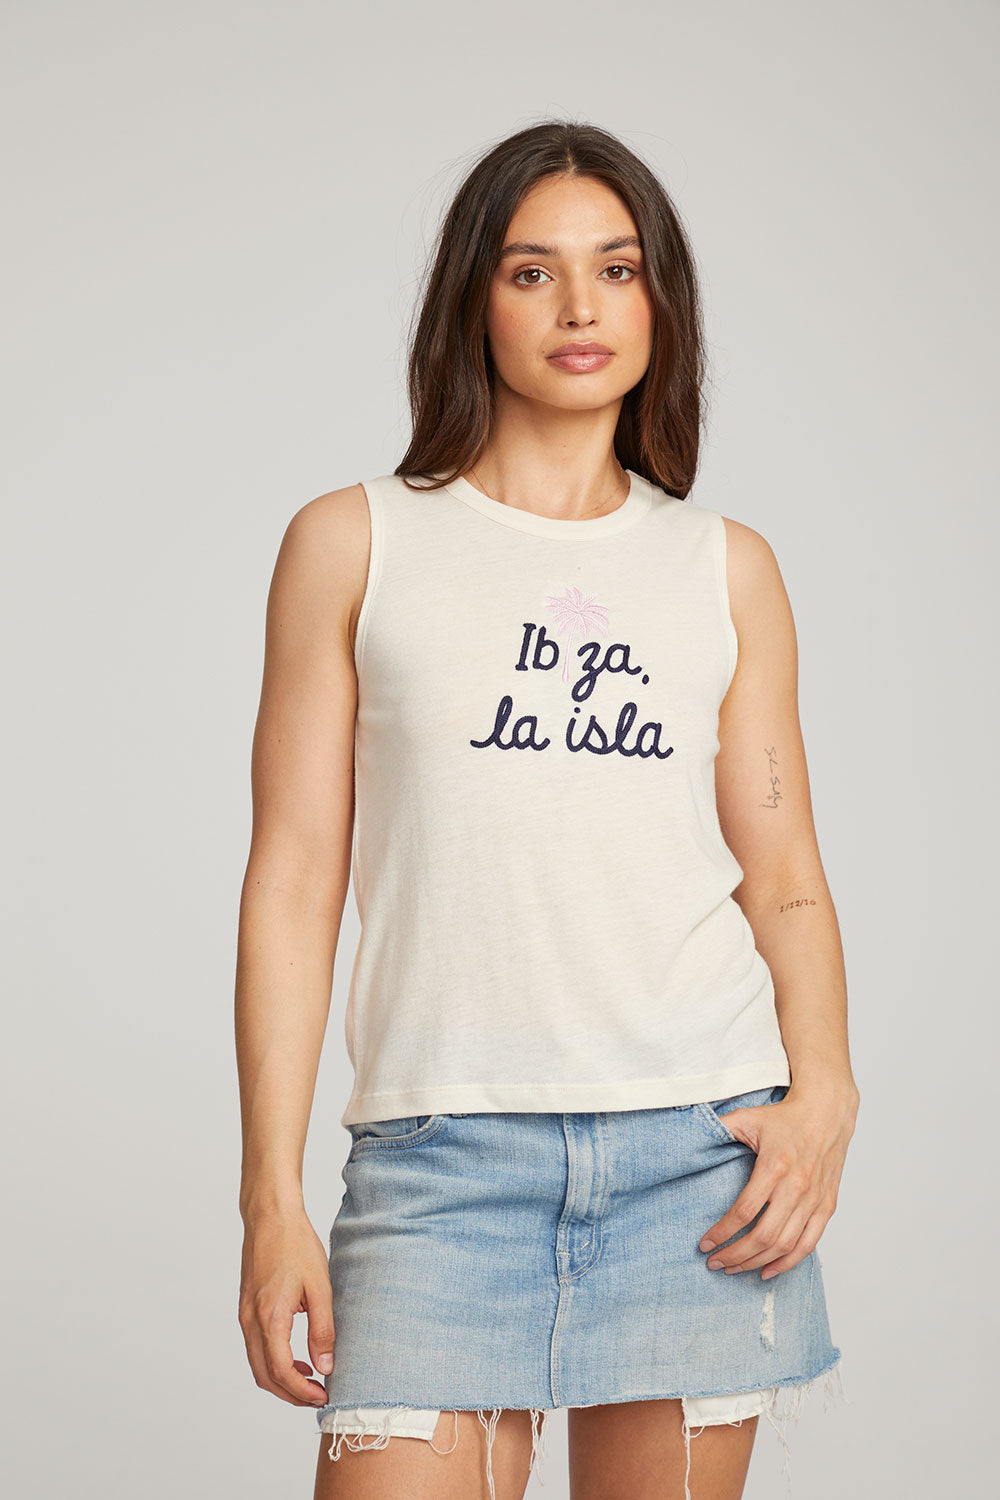 Ibiza Palm Muscle Tee WOMENS chaserbrand